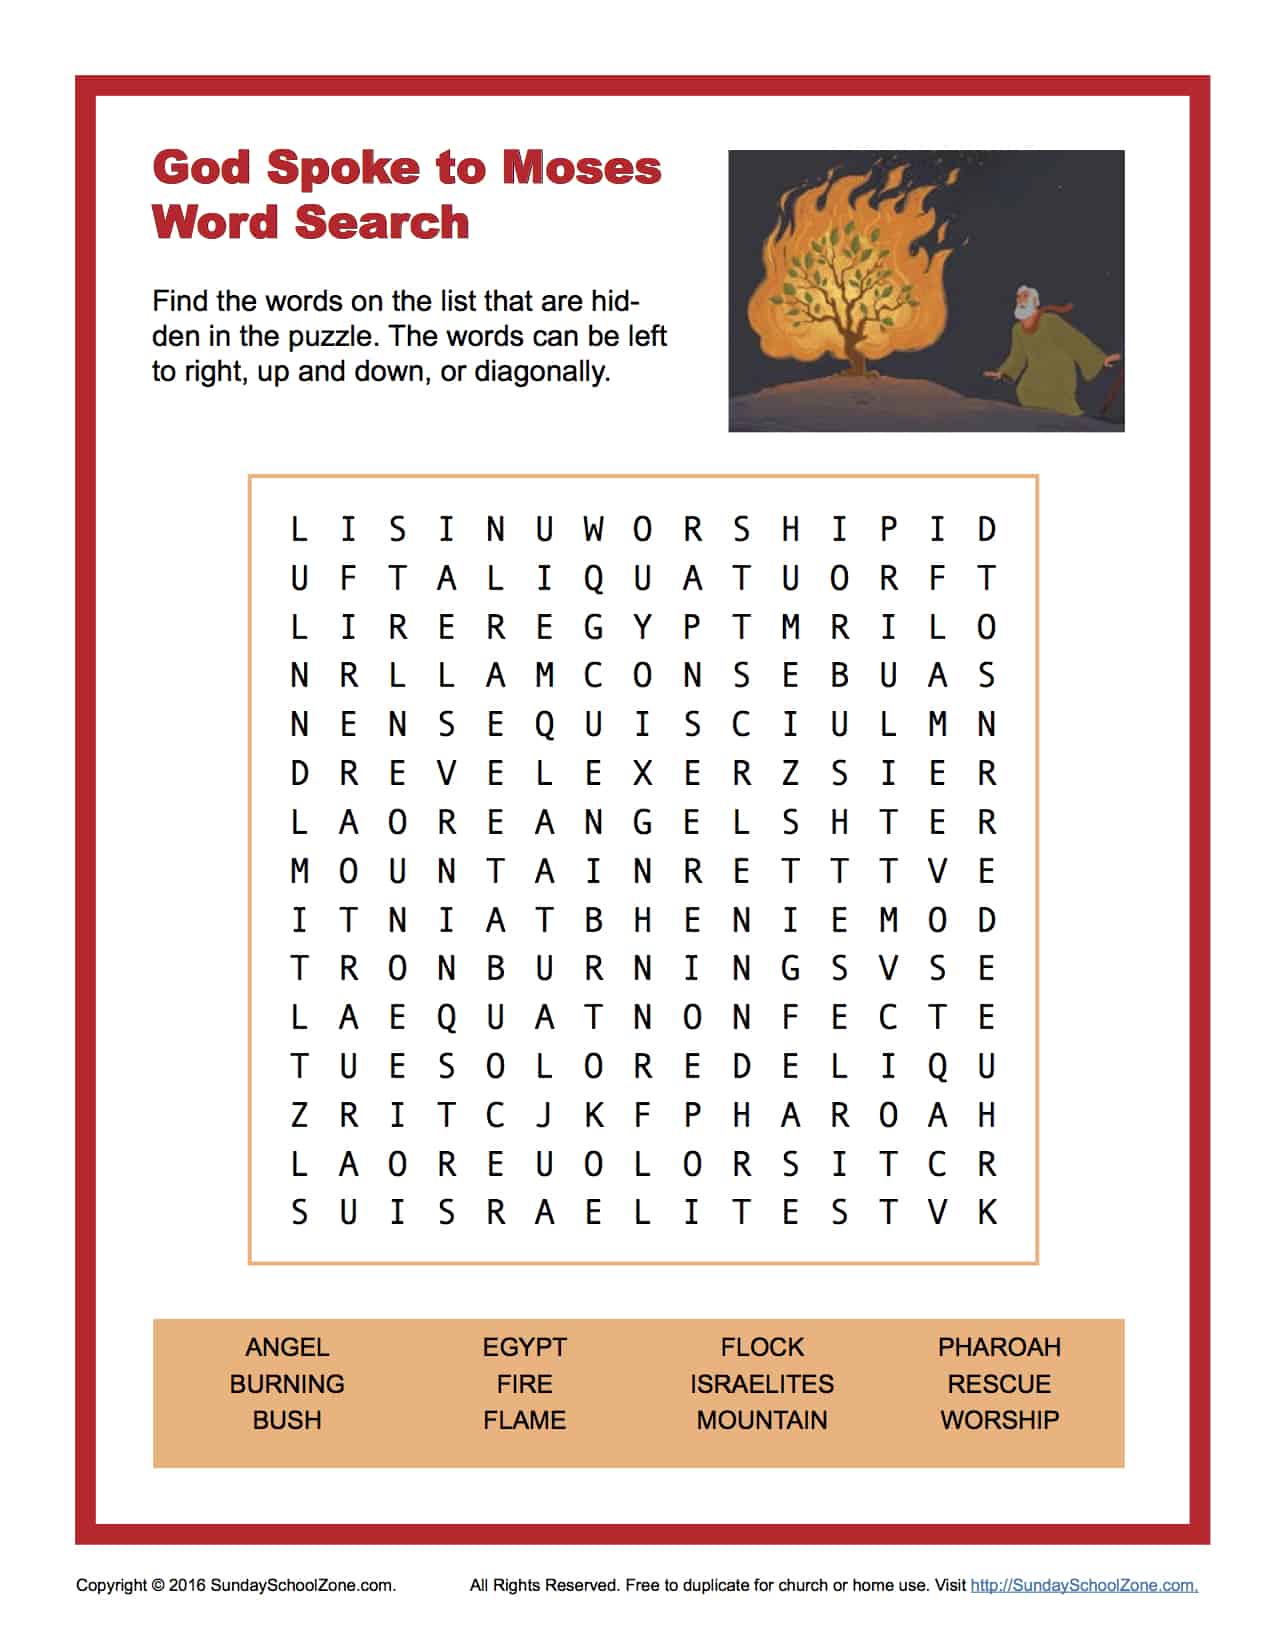 god spoke to moses word search childrens bible activities sunday